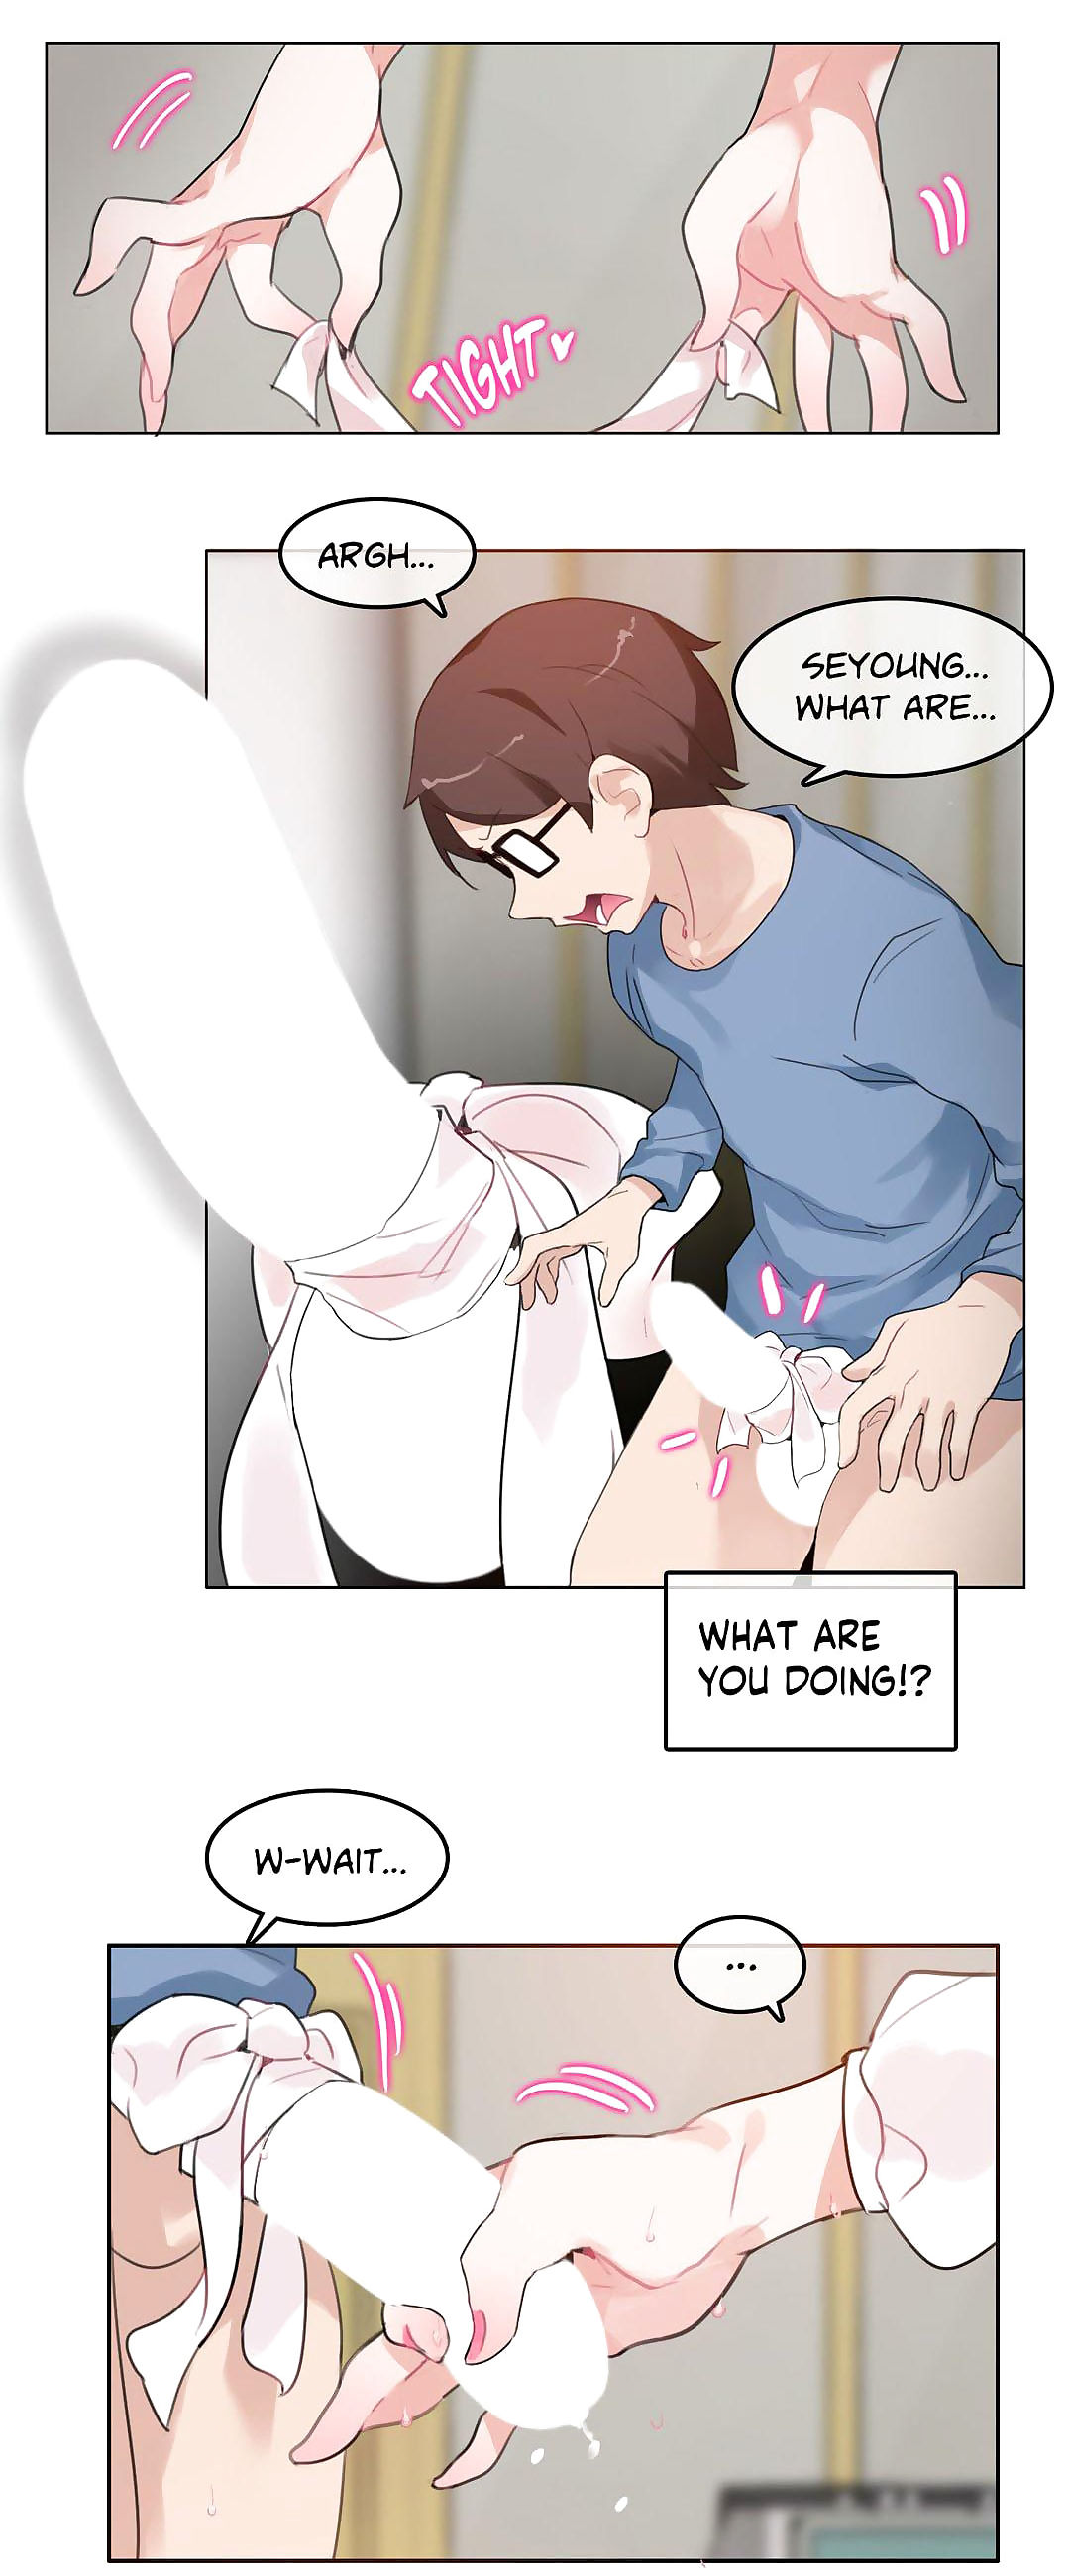 A Perverts Daily Life • Chapter 25: I want Sex - part 2